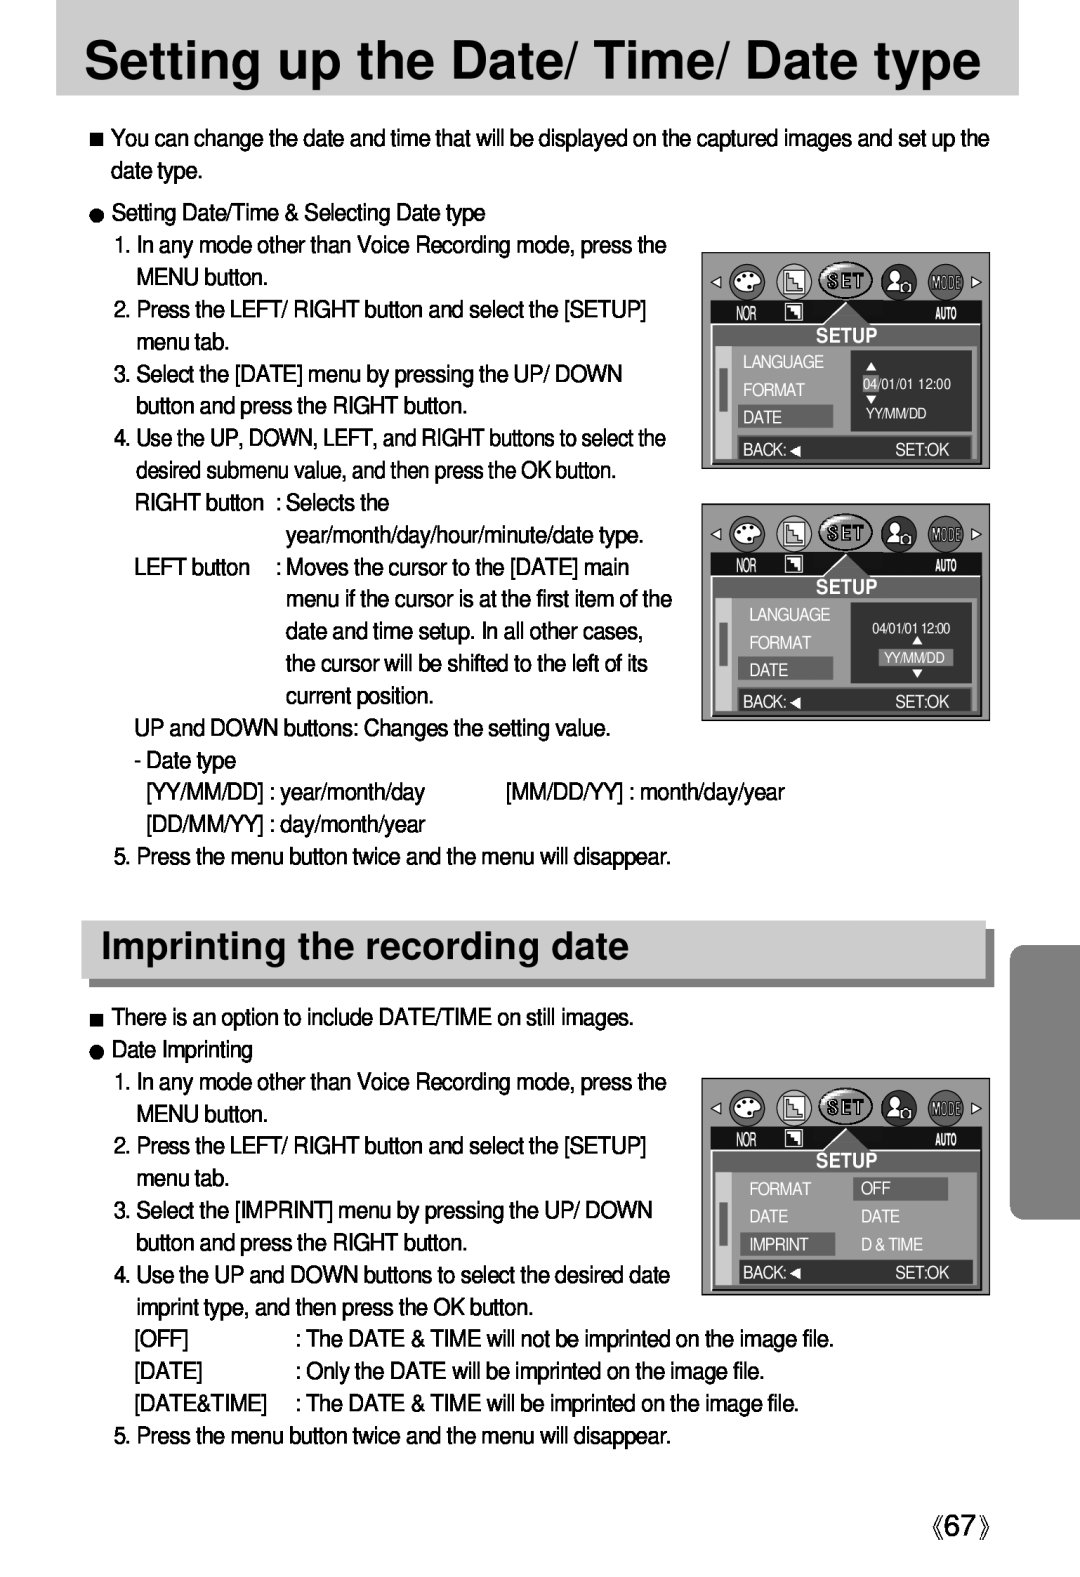 Samsung Digimax U-CA user manual Setting up the Date/ Time/ Date type, Imprinting the recording date 